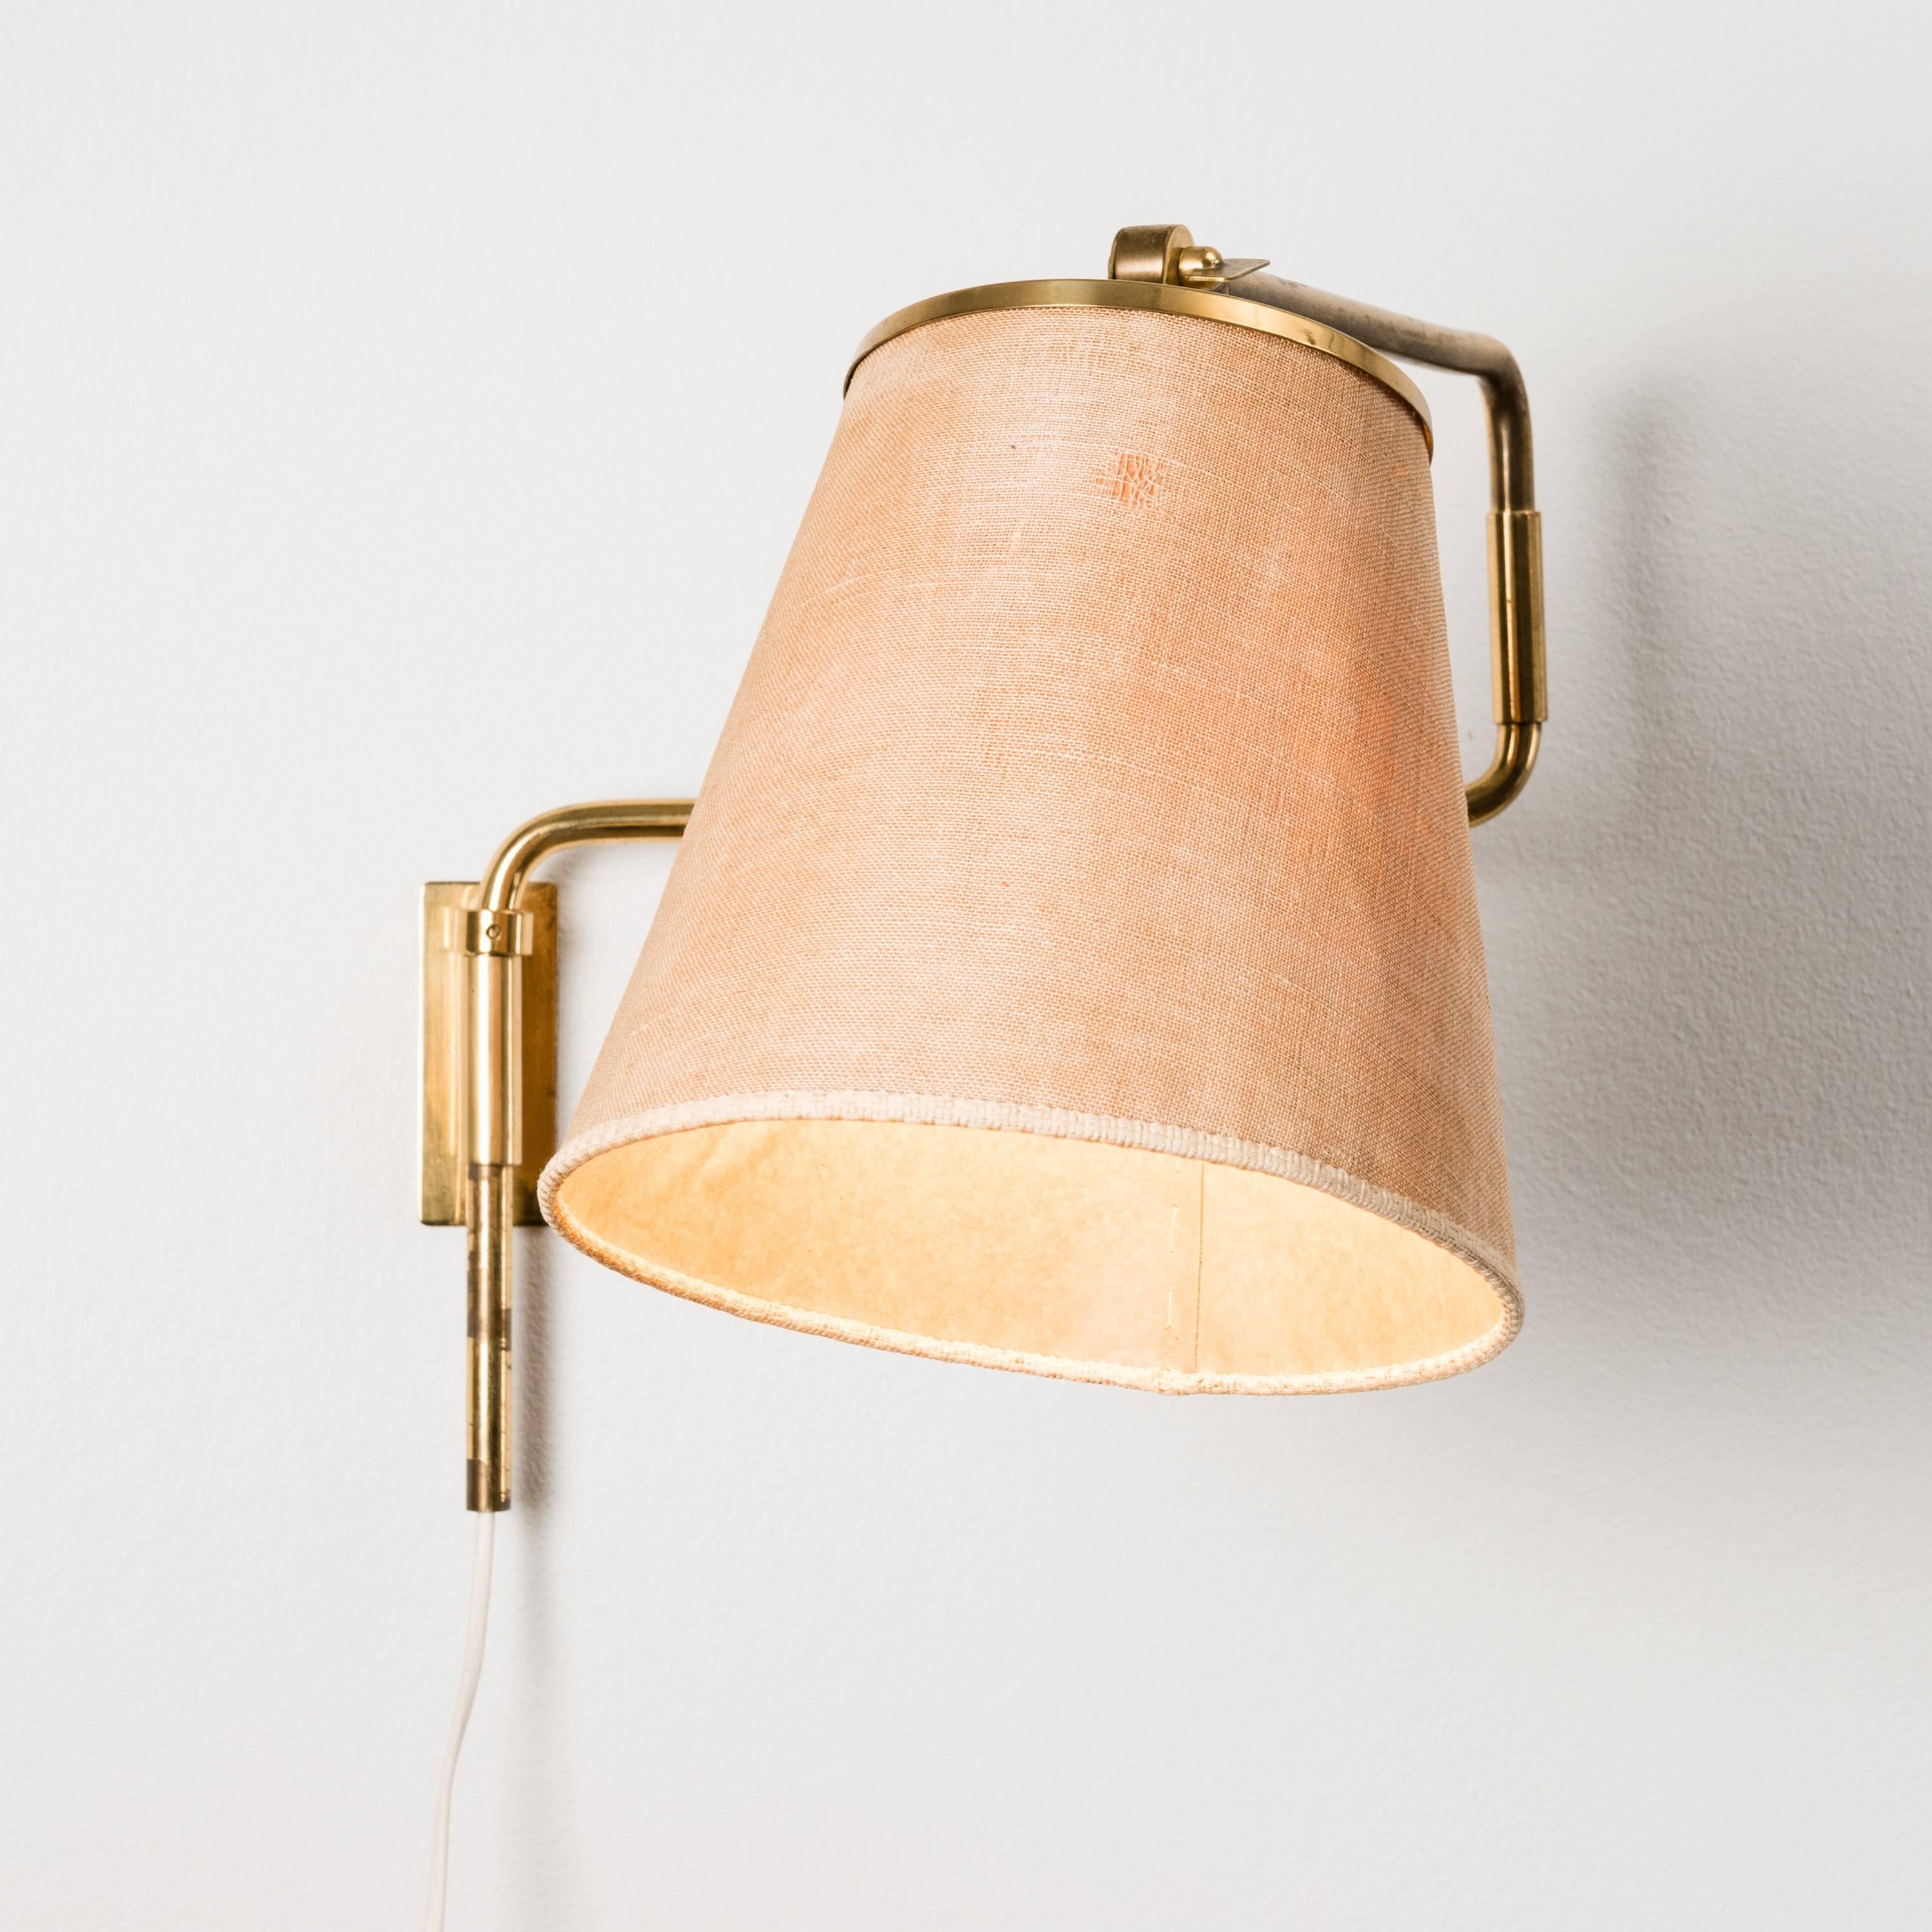 Paavo Tynell, wall light, model 9414, Taito, adjustable brass arm, with manufacturer's mark. Measure: Length ca 70 cm, height of the lampshade ca 22 cm.